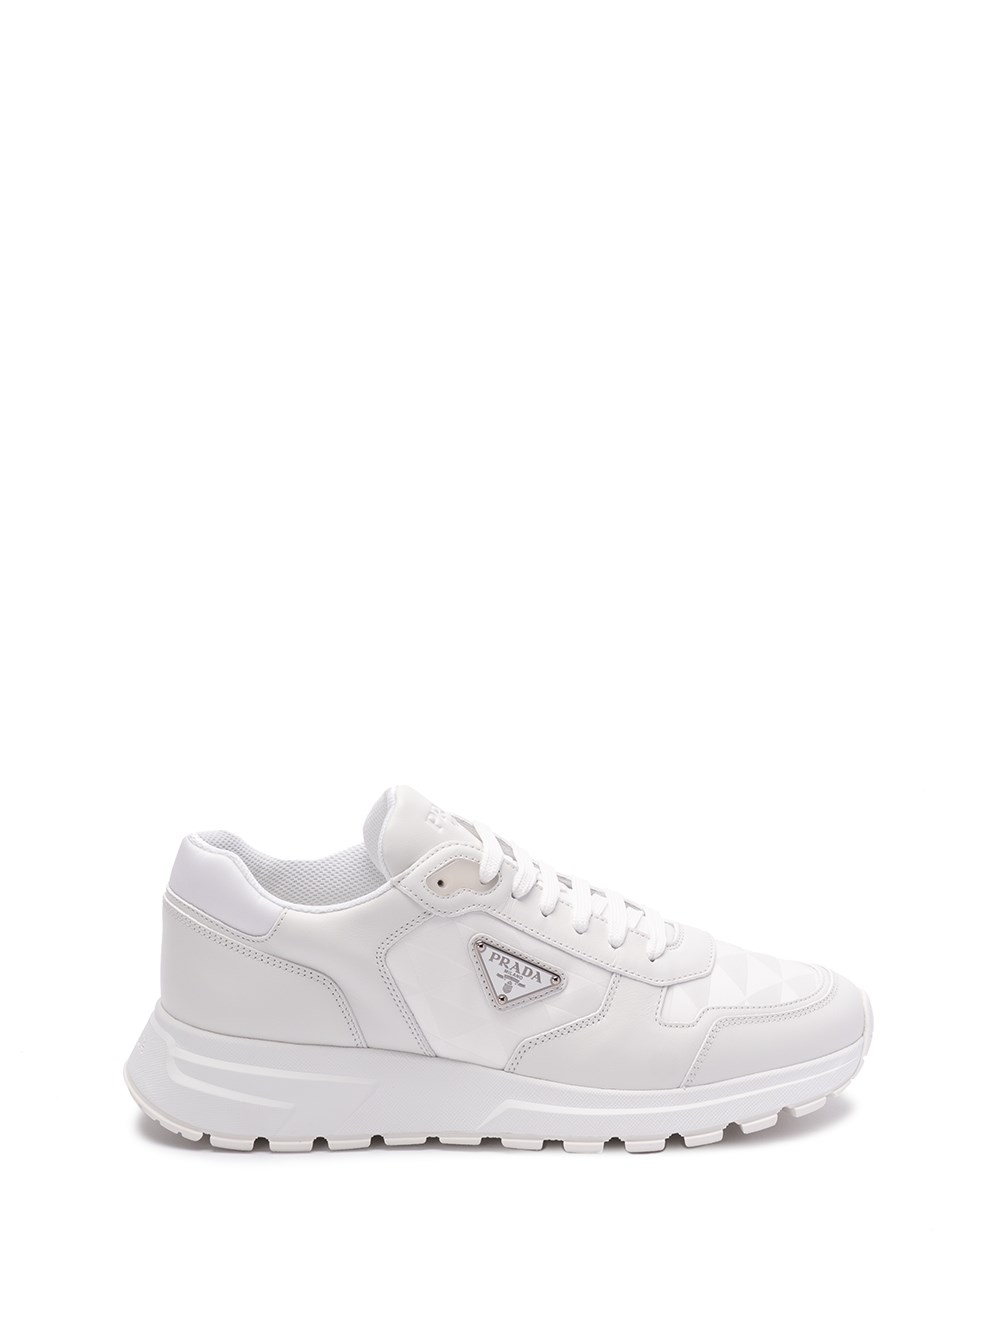 Prada Leather And `re-nylon` Sneakers In White